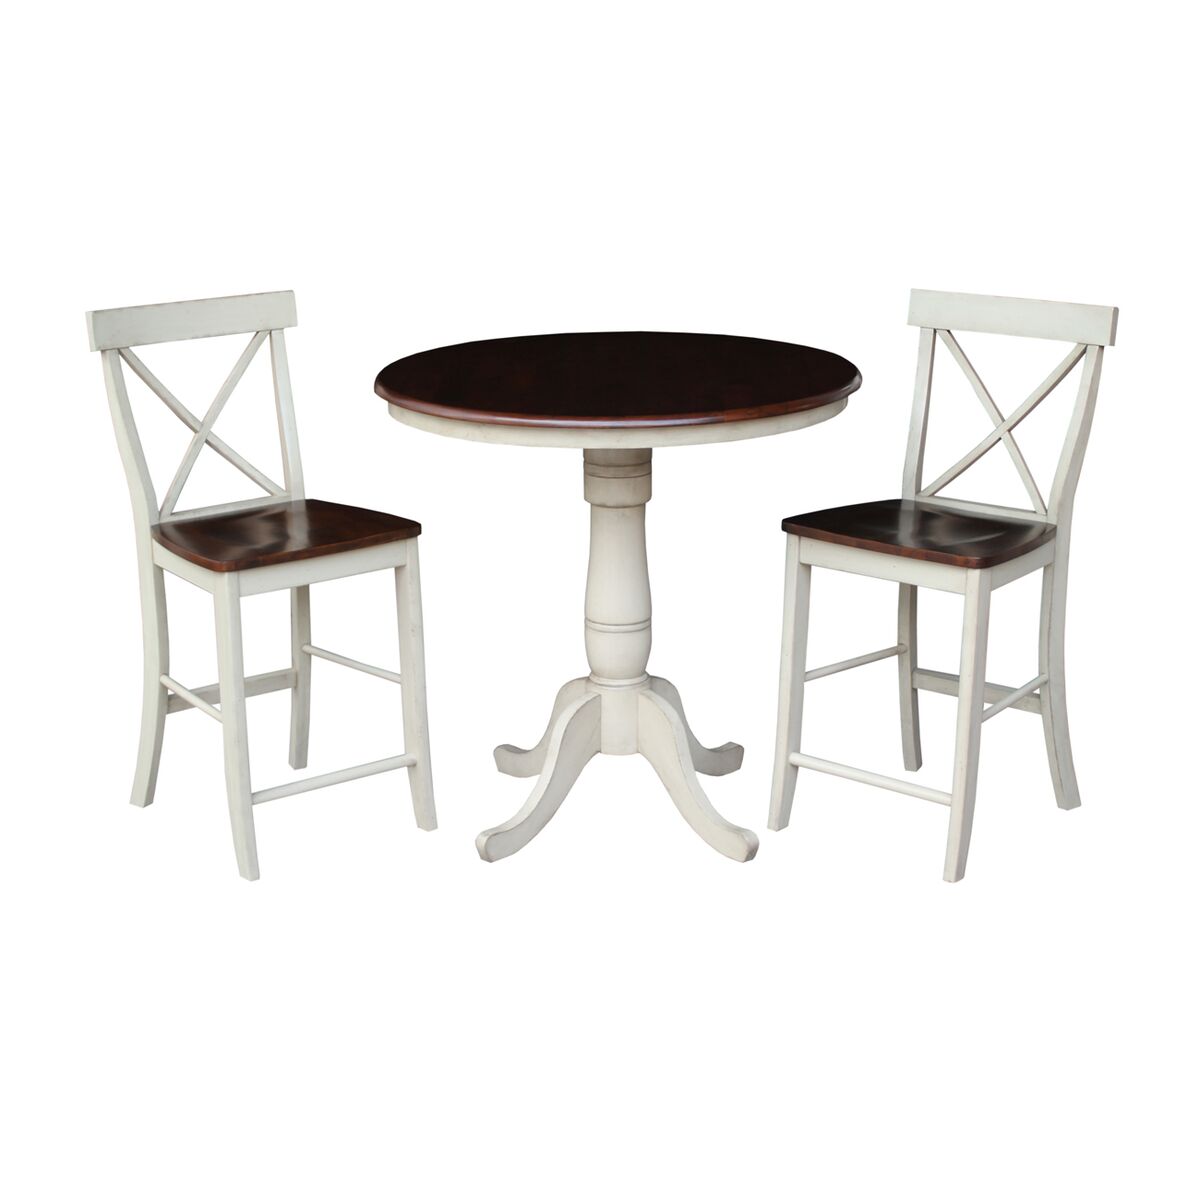 K12-36rt-6b-32 36 In. Round Pedestal Gathering Height Table With 2 X-back Counter Height Stools -3 Piece Set